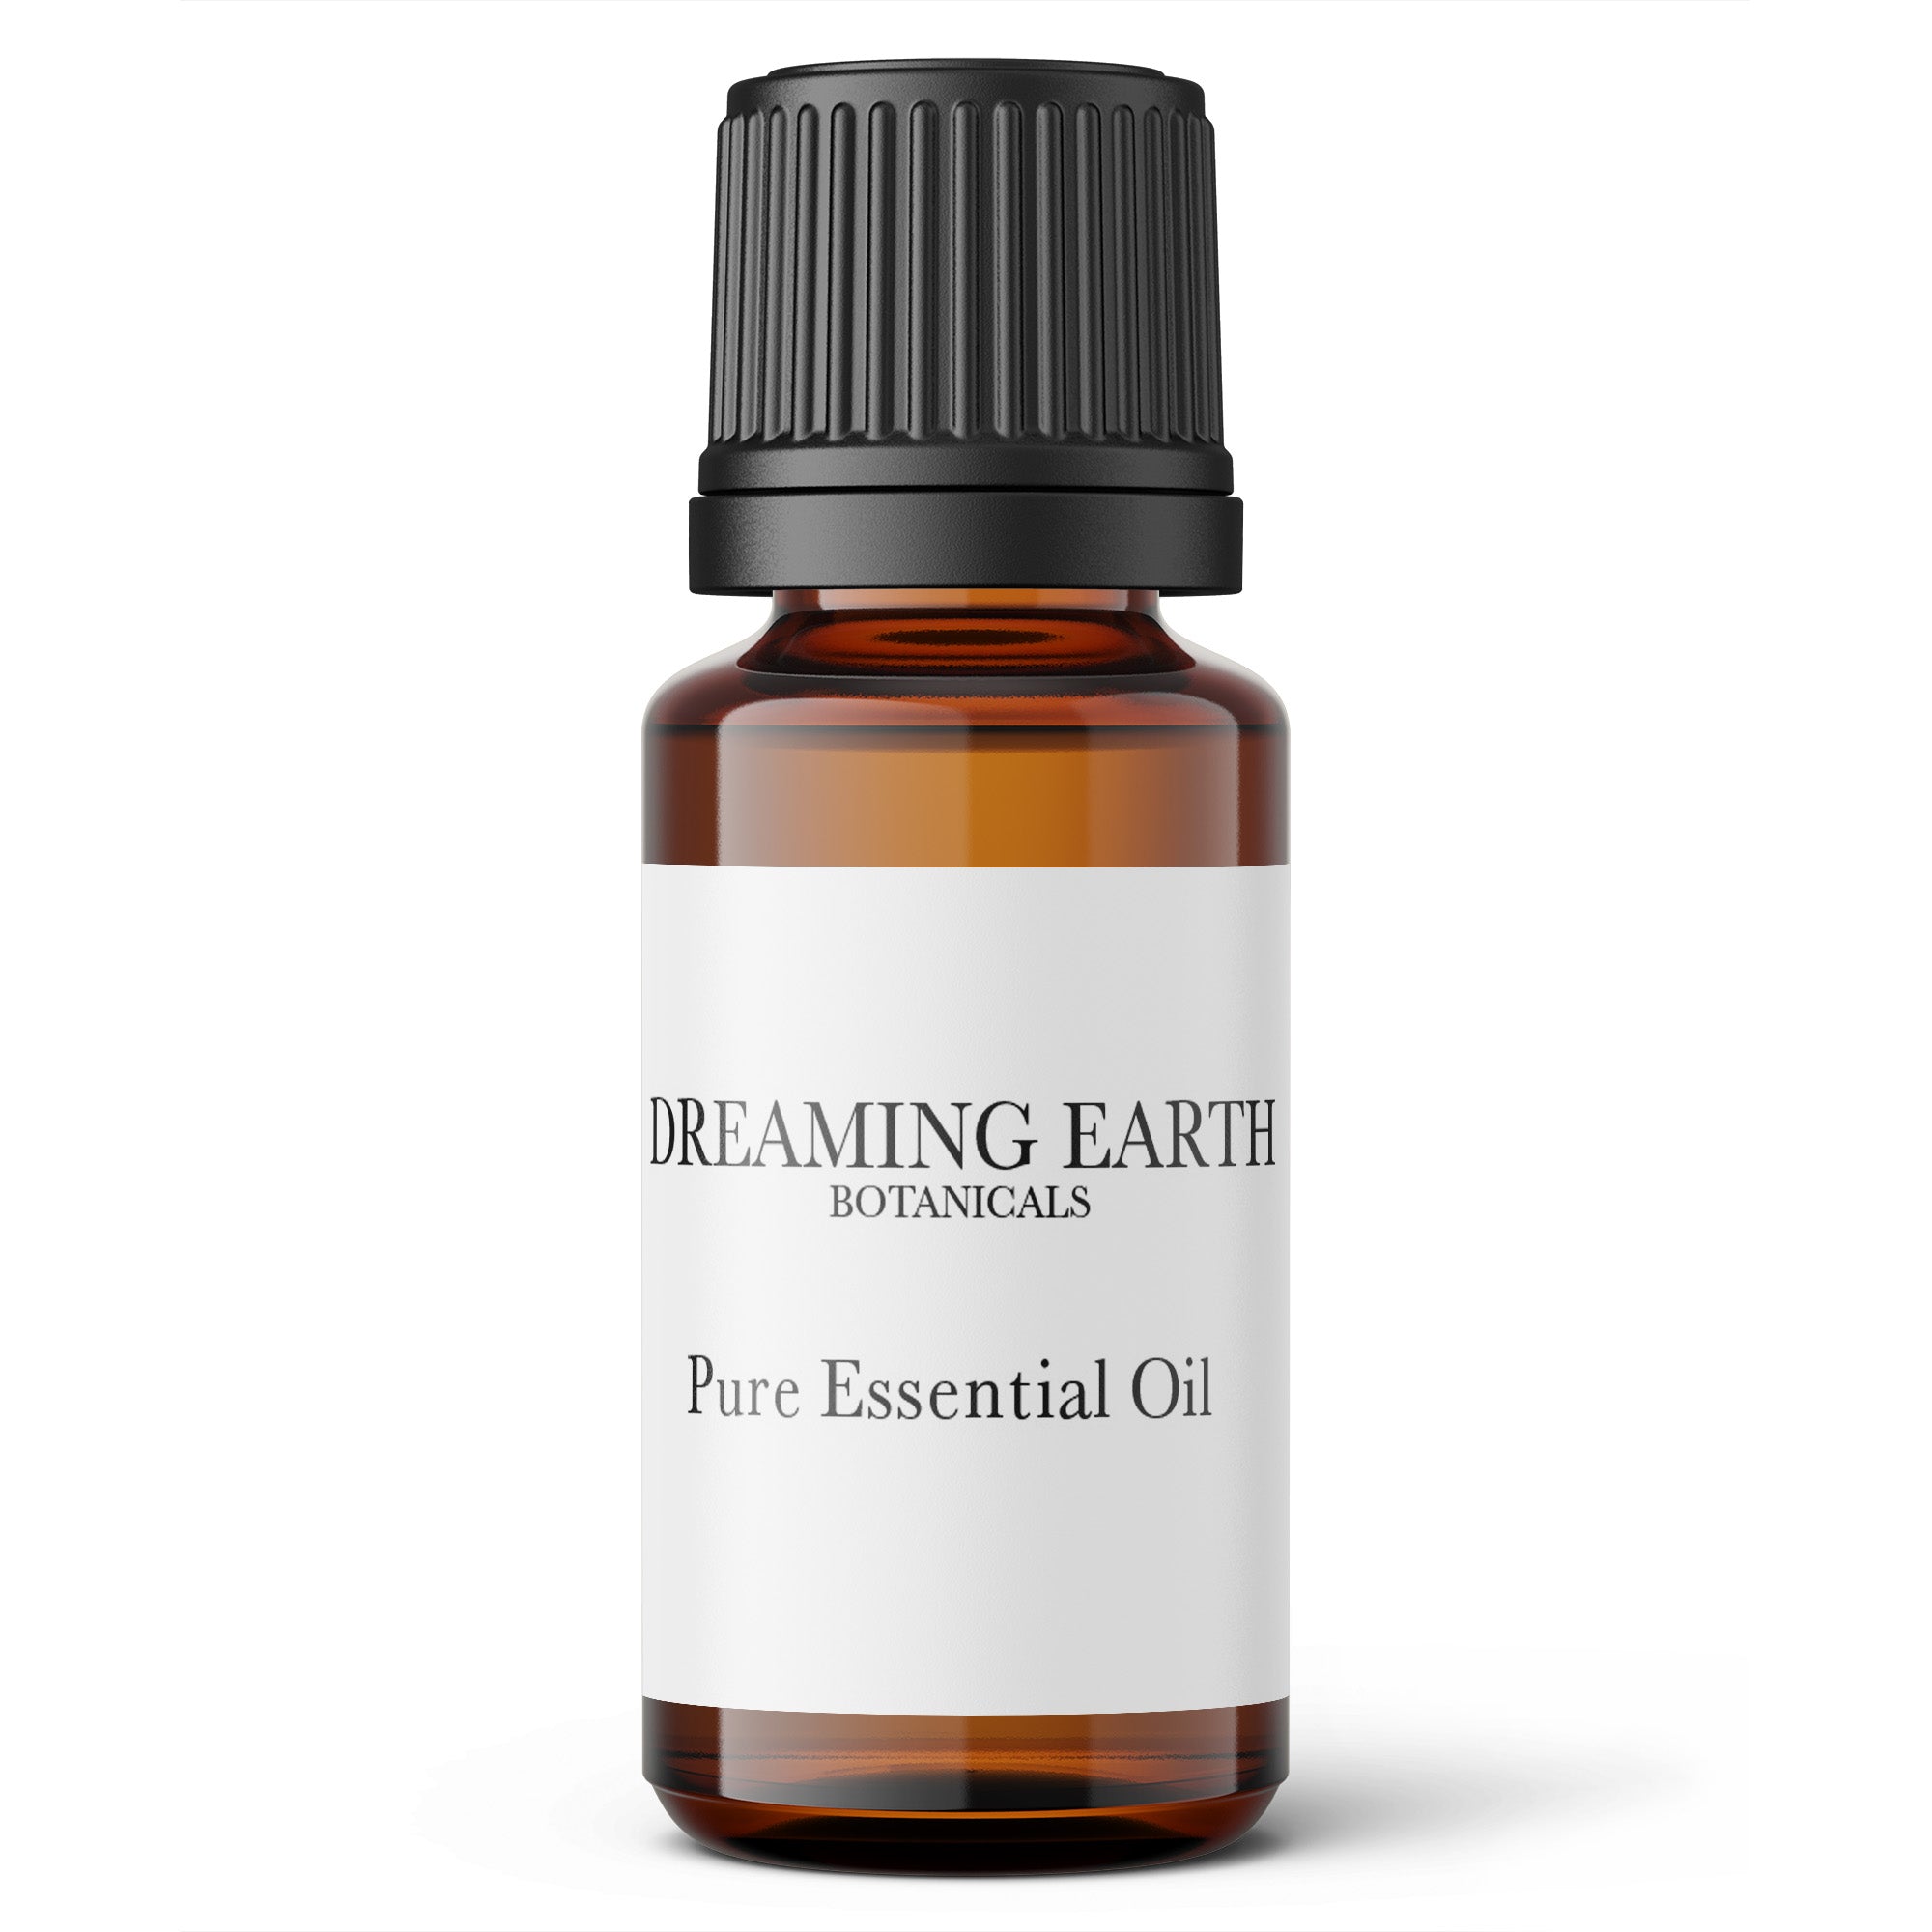 Load image into Gallery viewer, Ginger Root Essential Oil (C02 Extracted) - Dreaming Earth Inc
